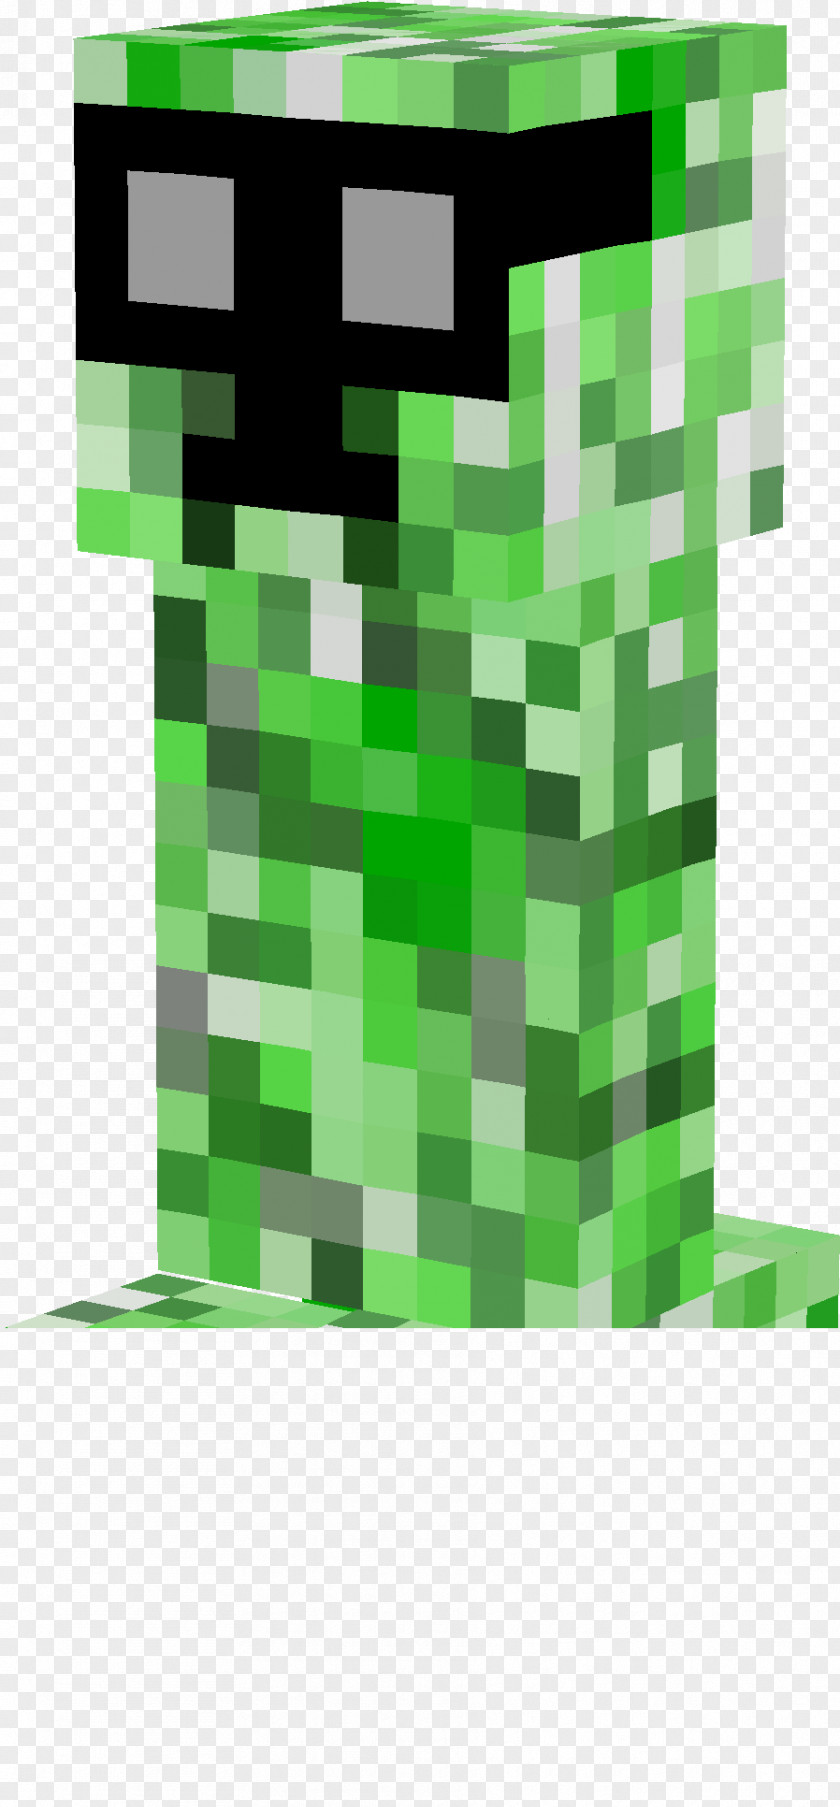 Skin Minecraft: Pocket Edition Story Mode Mob Creeper PNG